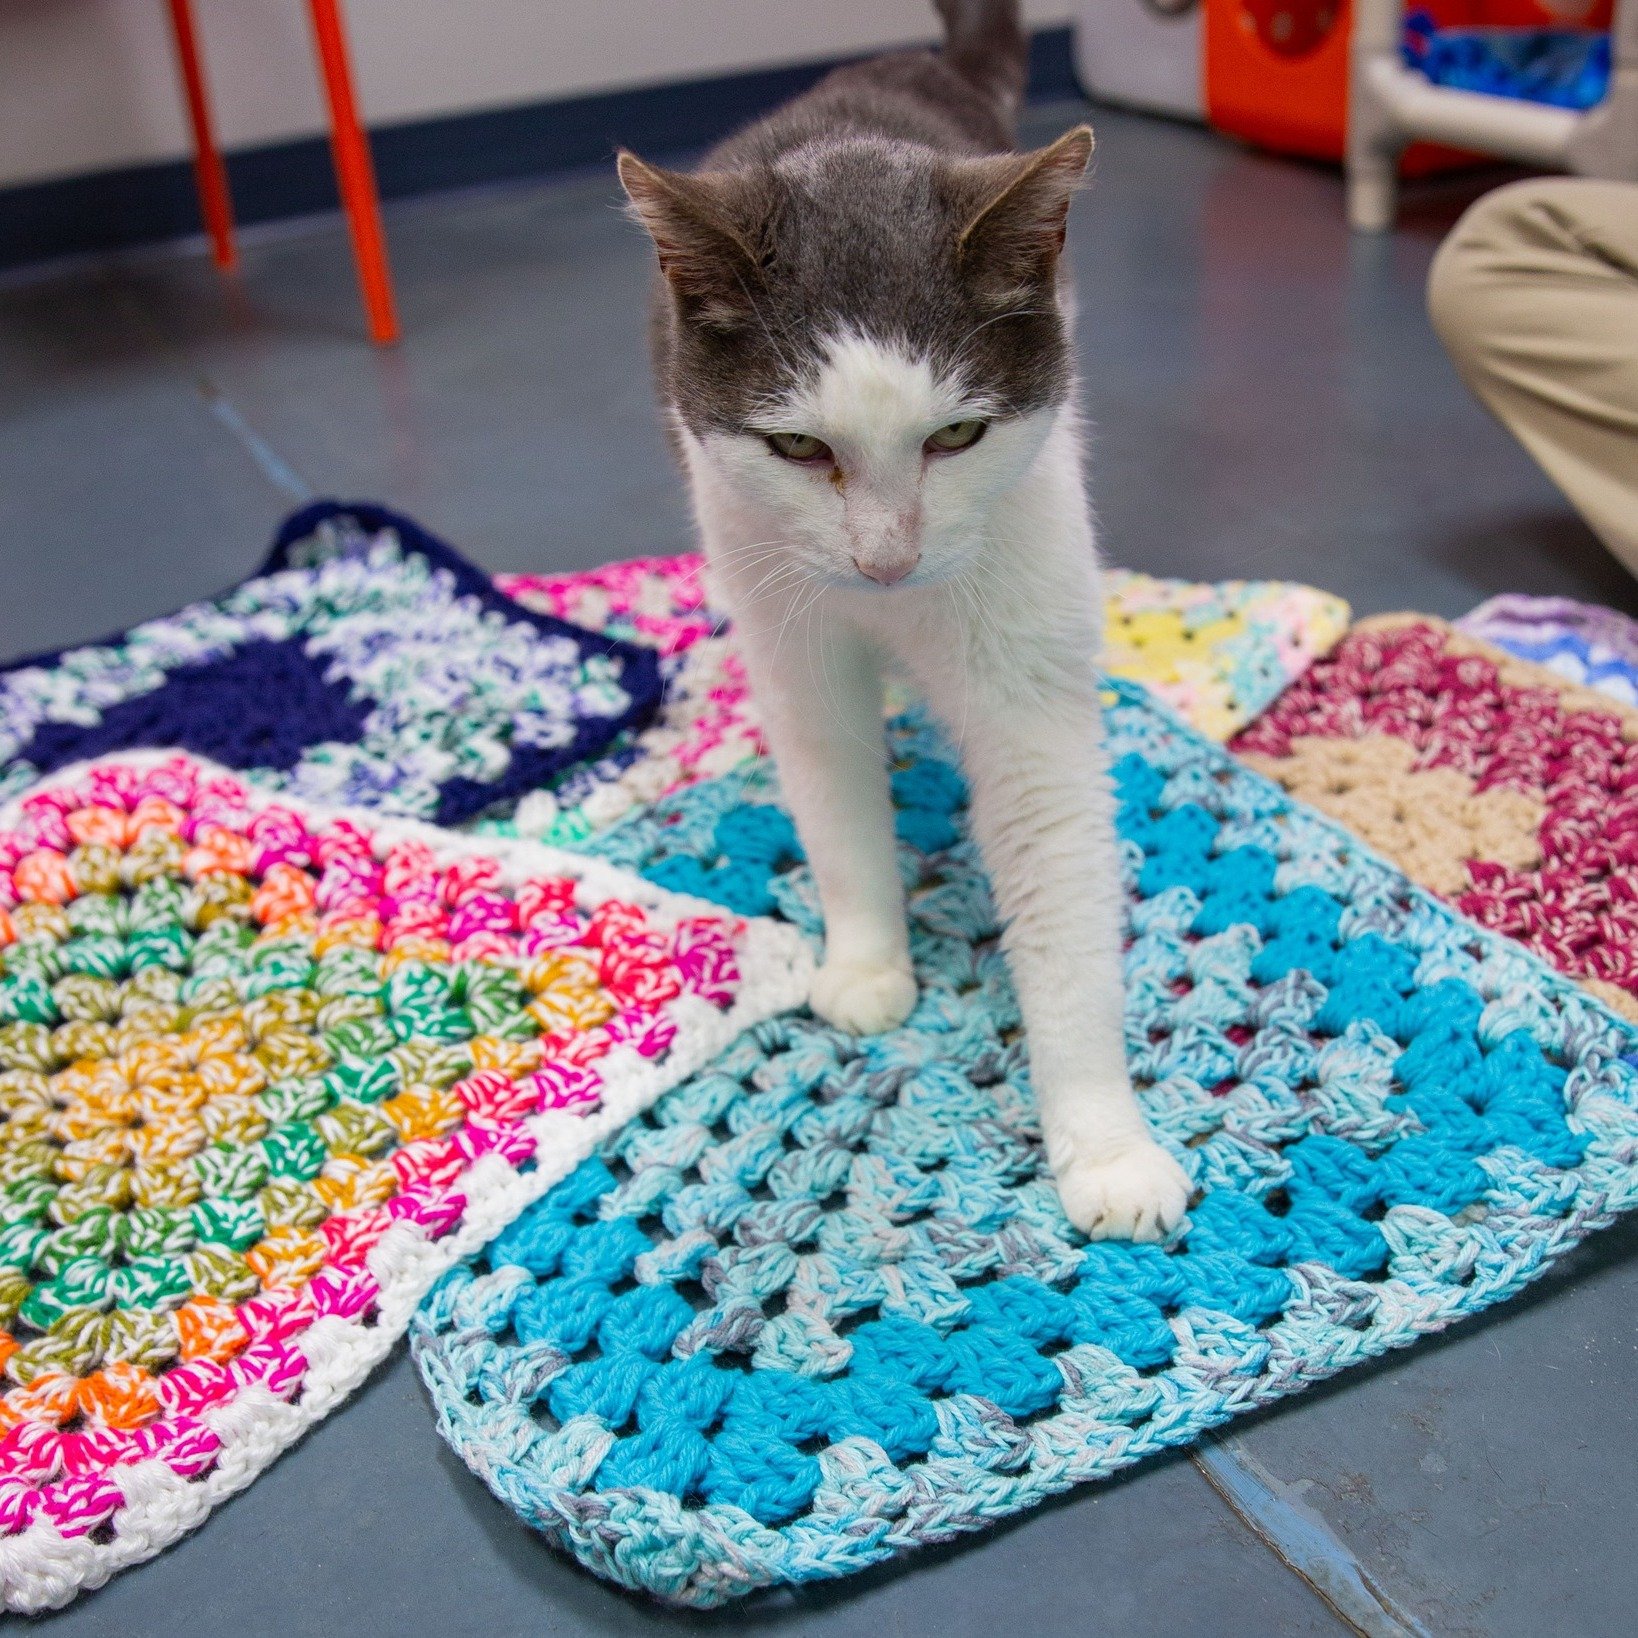 Let's give a round of applause to Sharon Nienhueser, who has been crocheting blankets for our kitties for many years, since around 2016. We're excited to announce that Sharon has just finished her 700th blanket!

Her blankets are pictured here with o